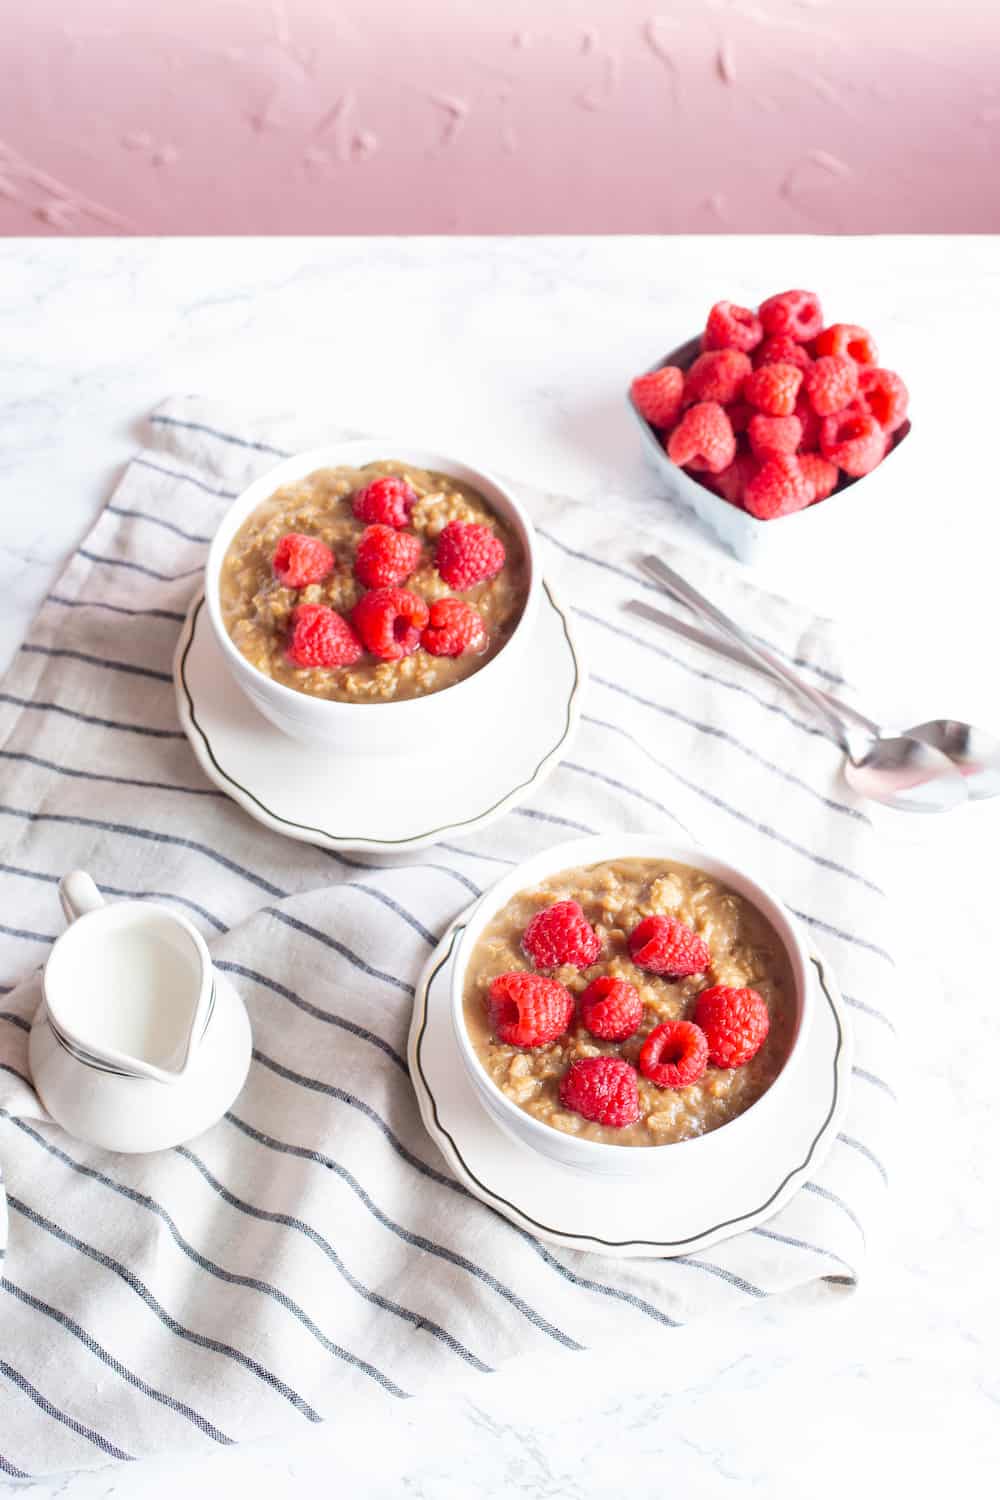 Coffee Oatmeal for the Best of All Breakfast Worlds - Good Food Stories